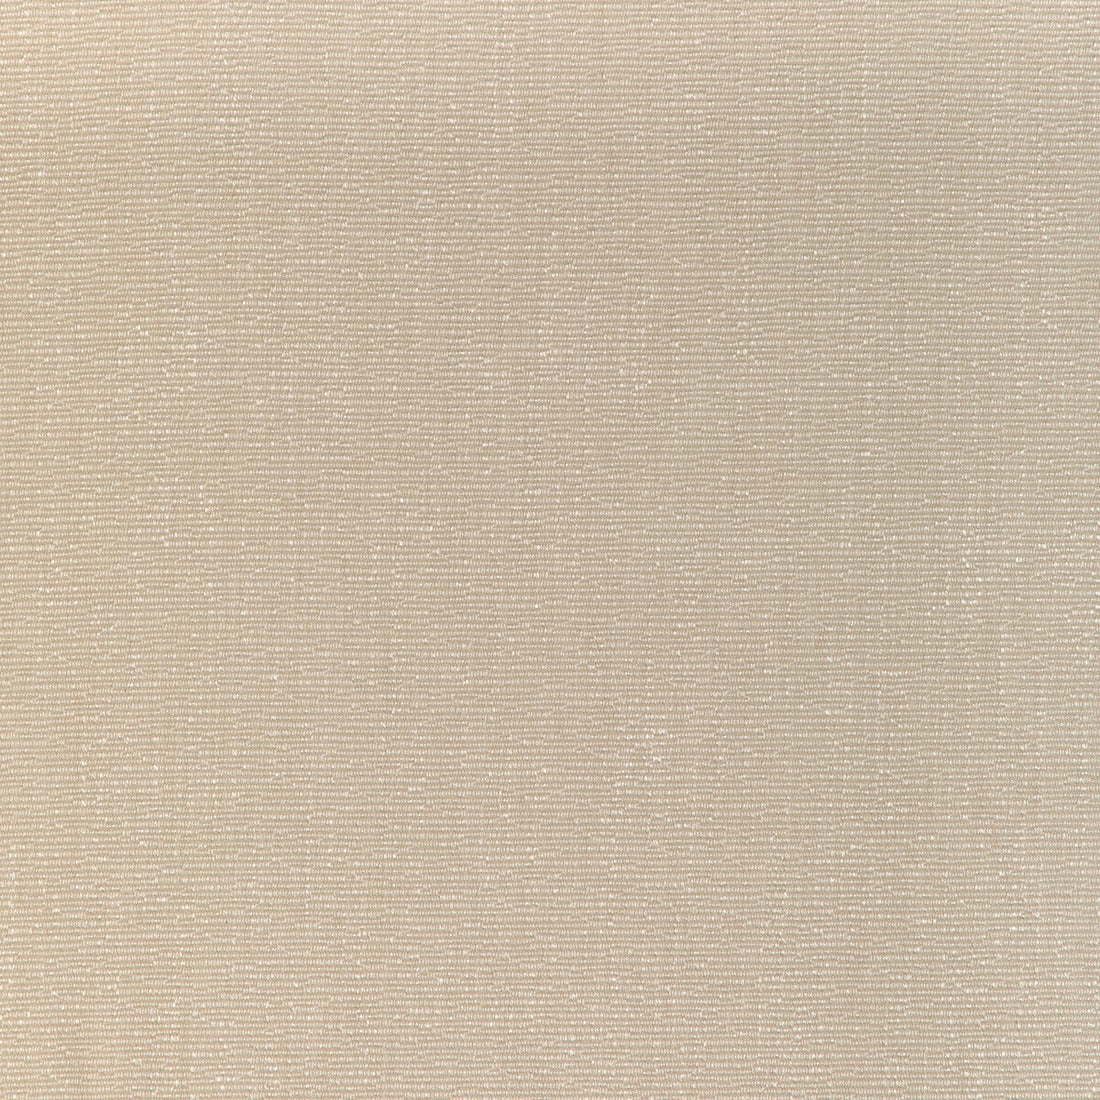 Carnot Plain fabric in ivory color - pattern 8023129.1.0 - by Brunschwig &amp; Fils in the Arles Weaves collection